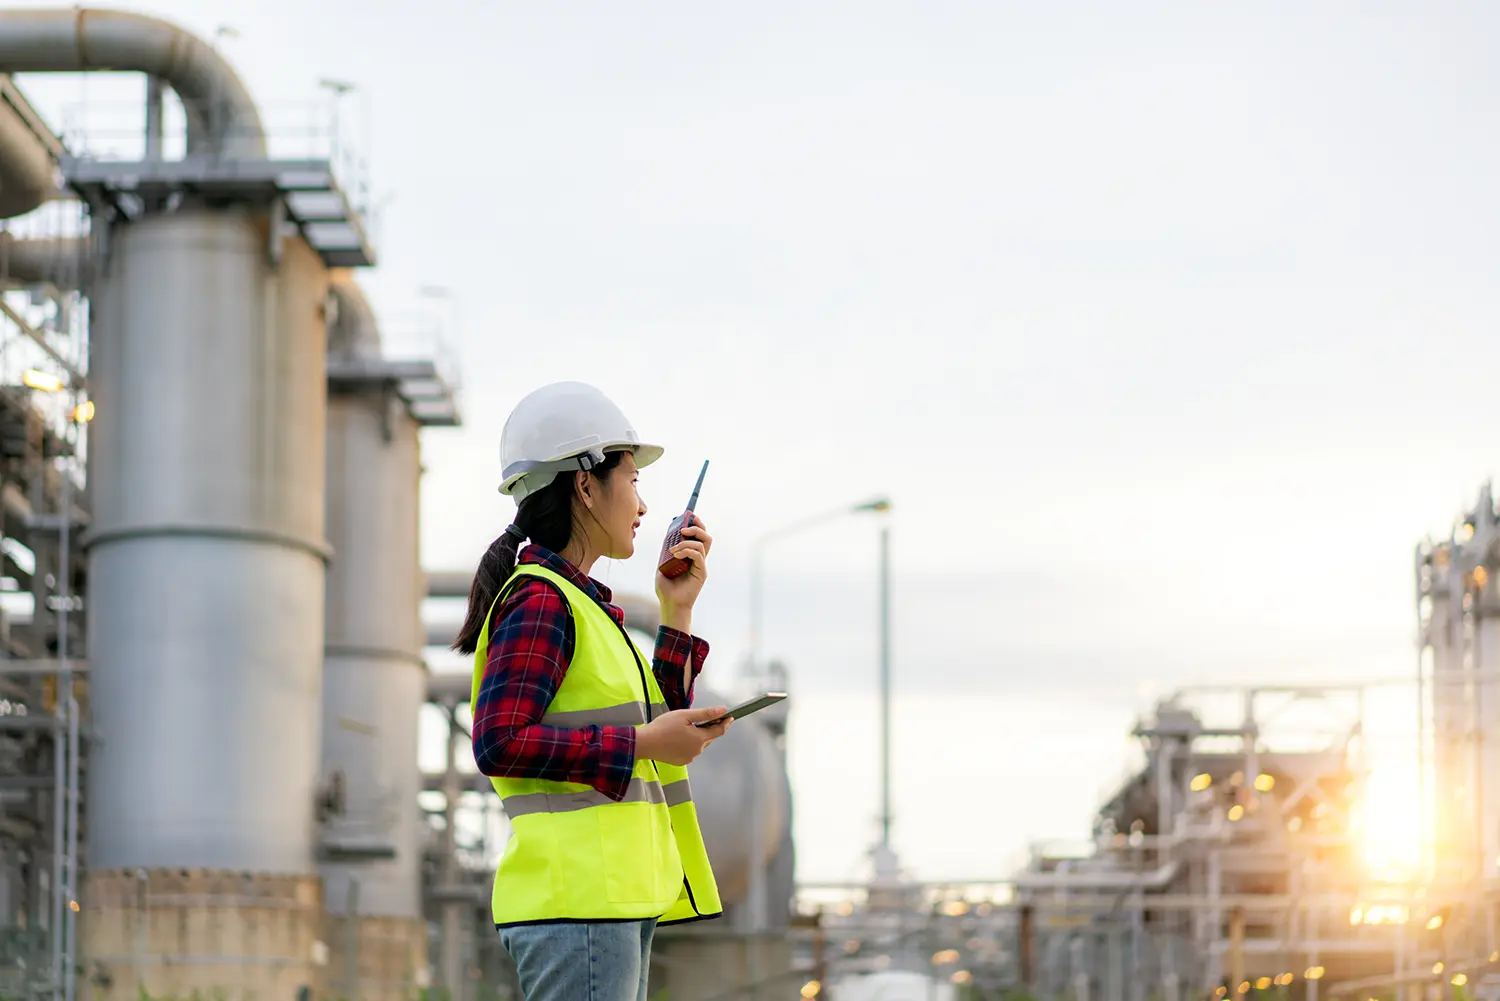 Asian woman technician Industrial engineer using walkie-talkie and holding bluprint working in oil refinery for building site survey in civil engineering project.